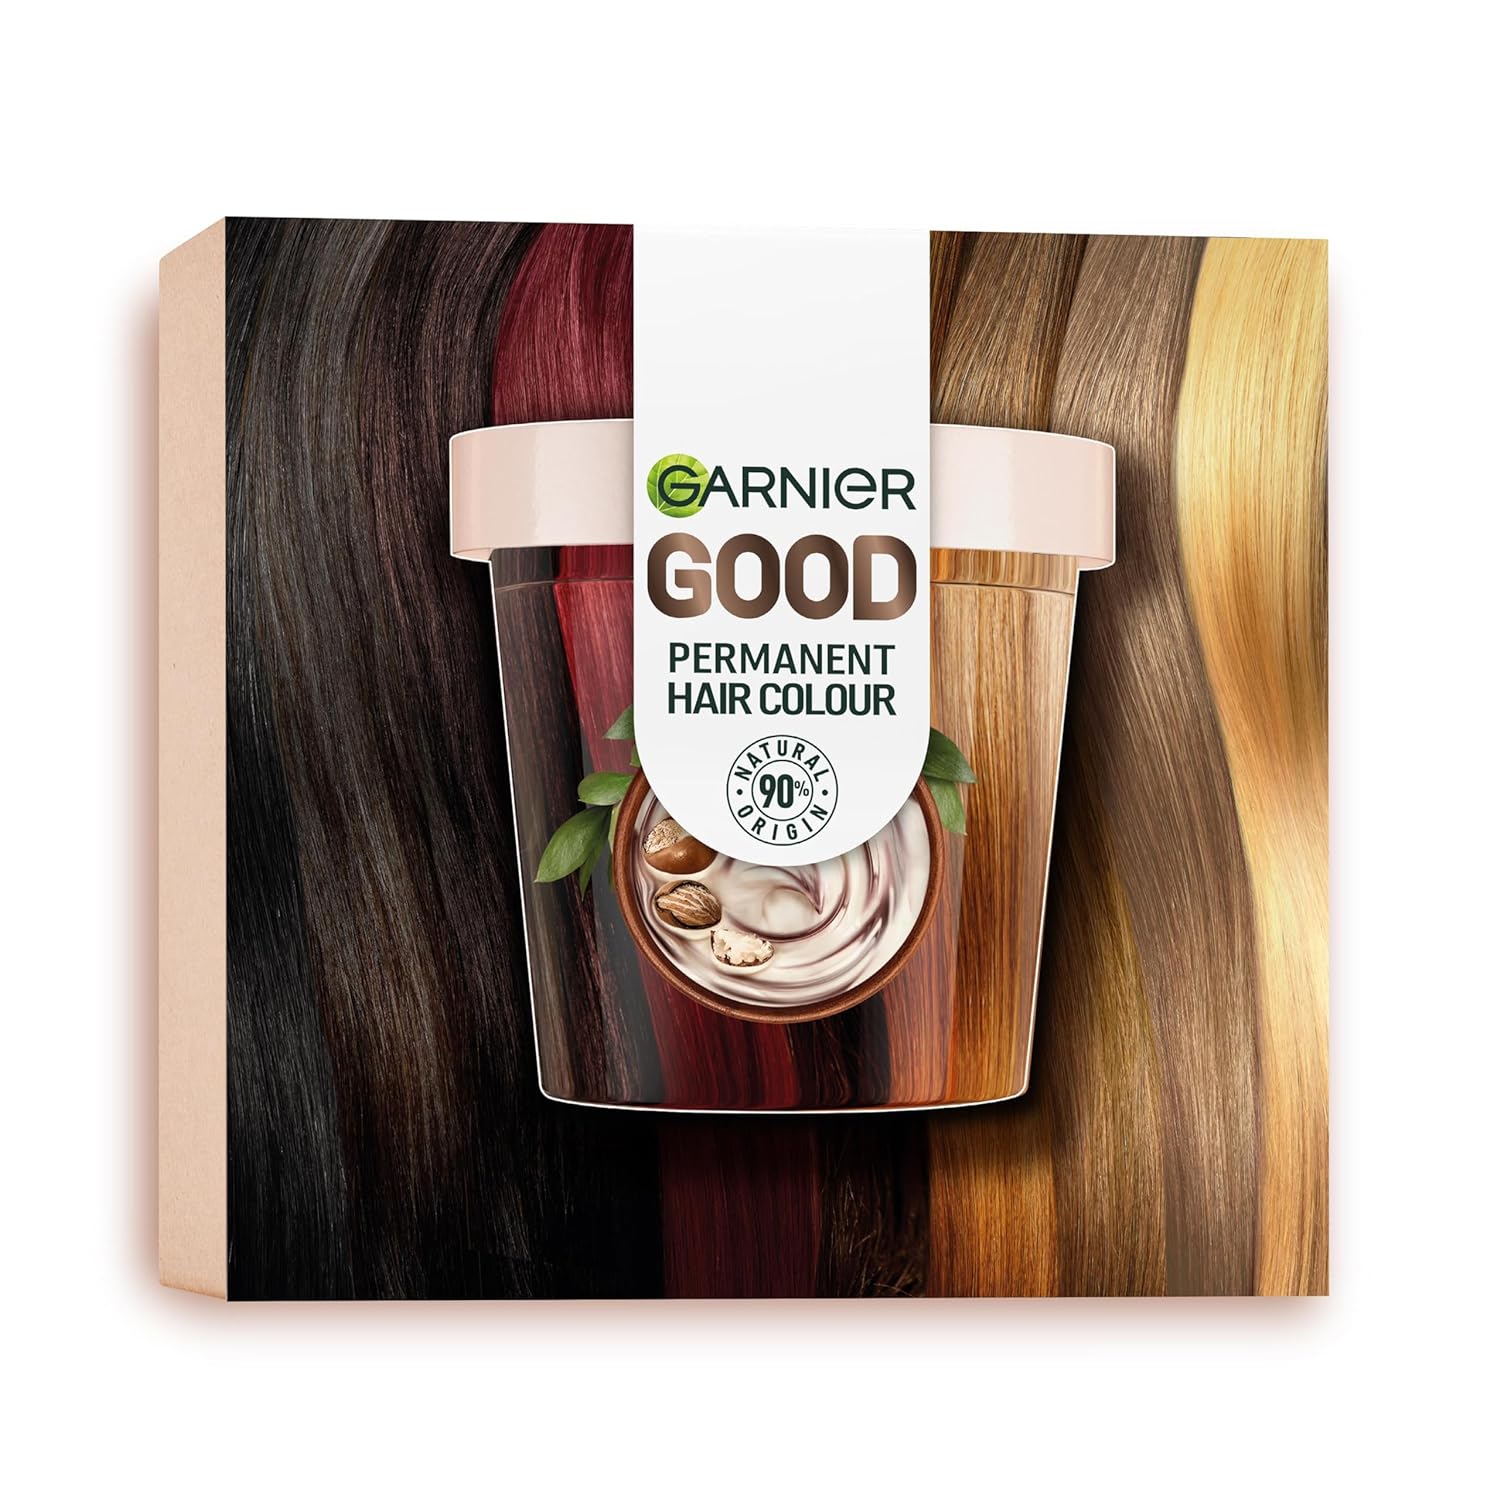 Garnier Permanent Hair Colour, Hair Dye Set for Intense and Long-Lasting Hair Colour, Colouration for up to 8 Weeks of Radiant Colour, No Ammonia, 5.0 Coffee Rust Brown, Good Refill Kit